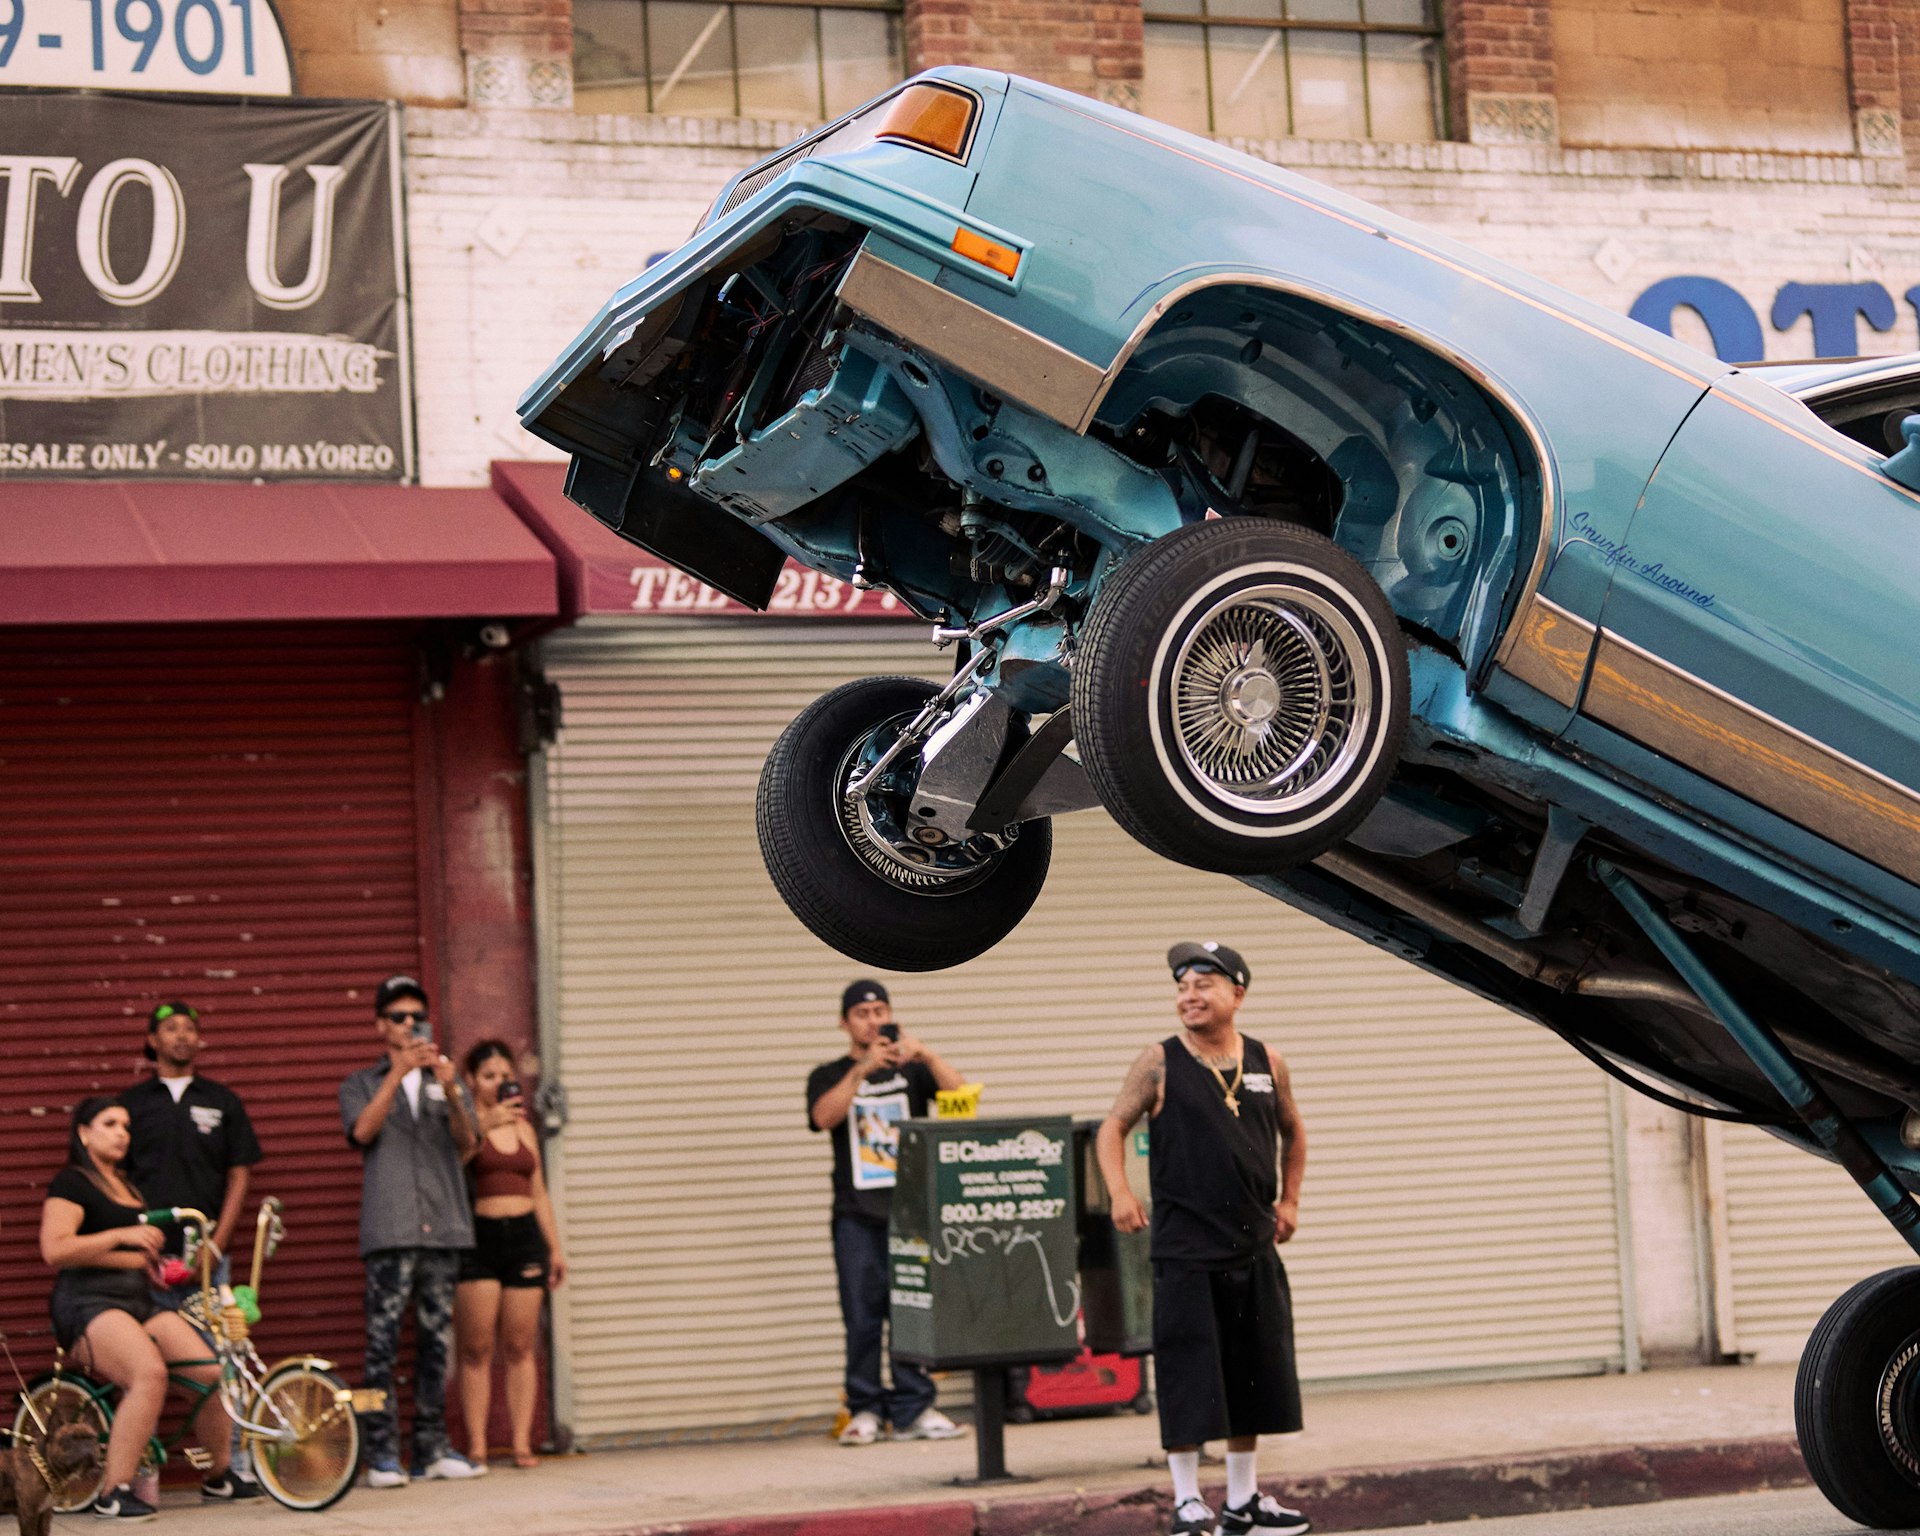 Vibrant photos of L.A.’s contemporary lowrider culture